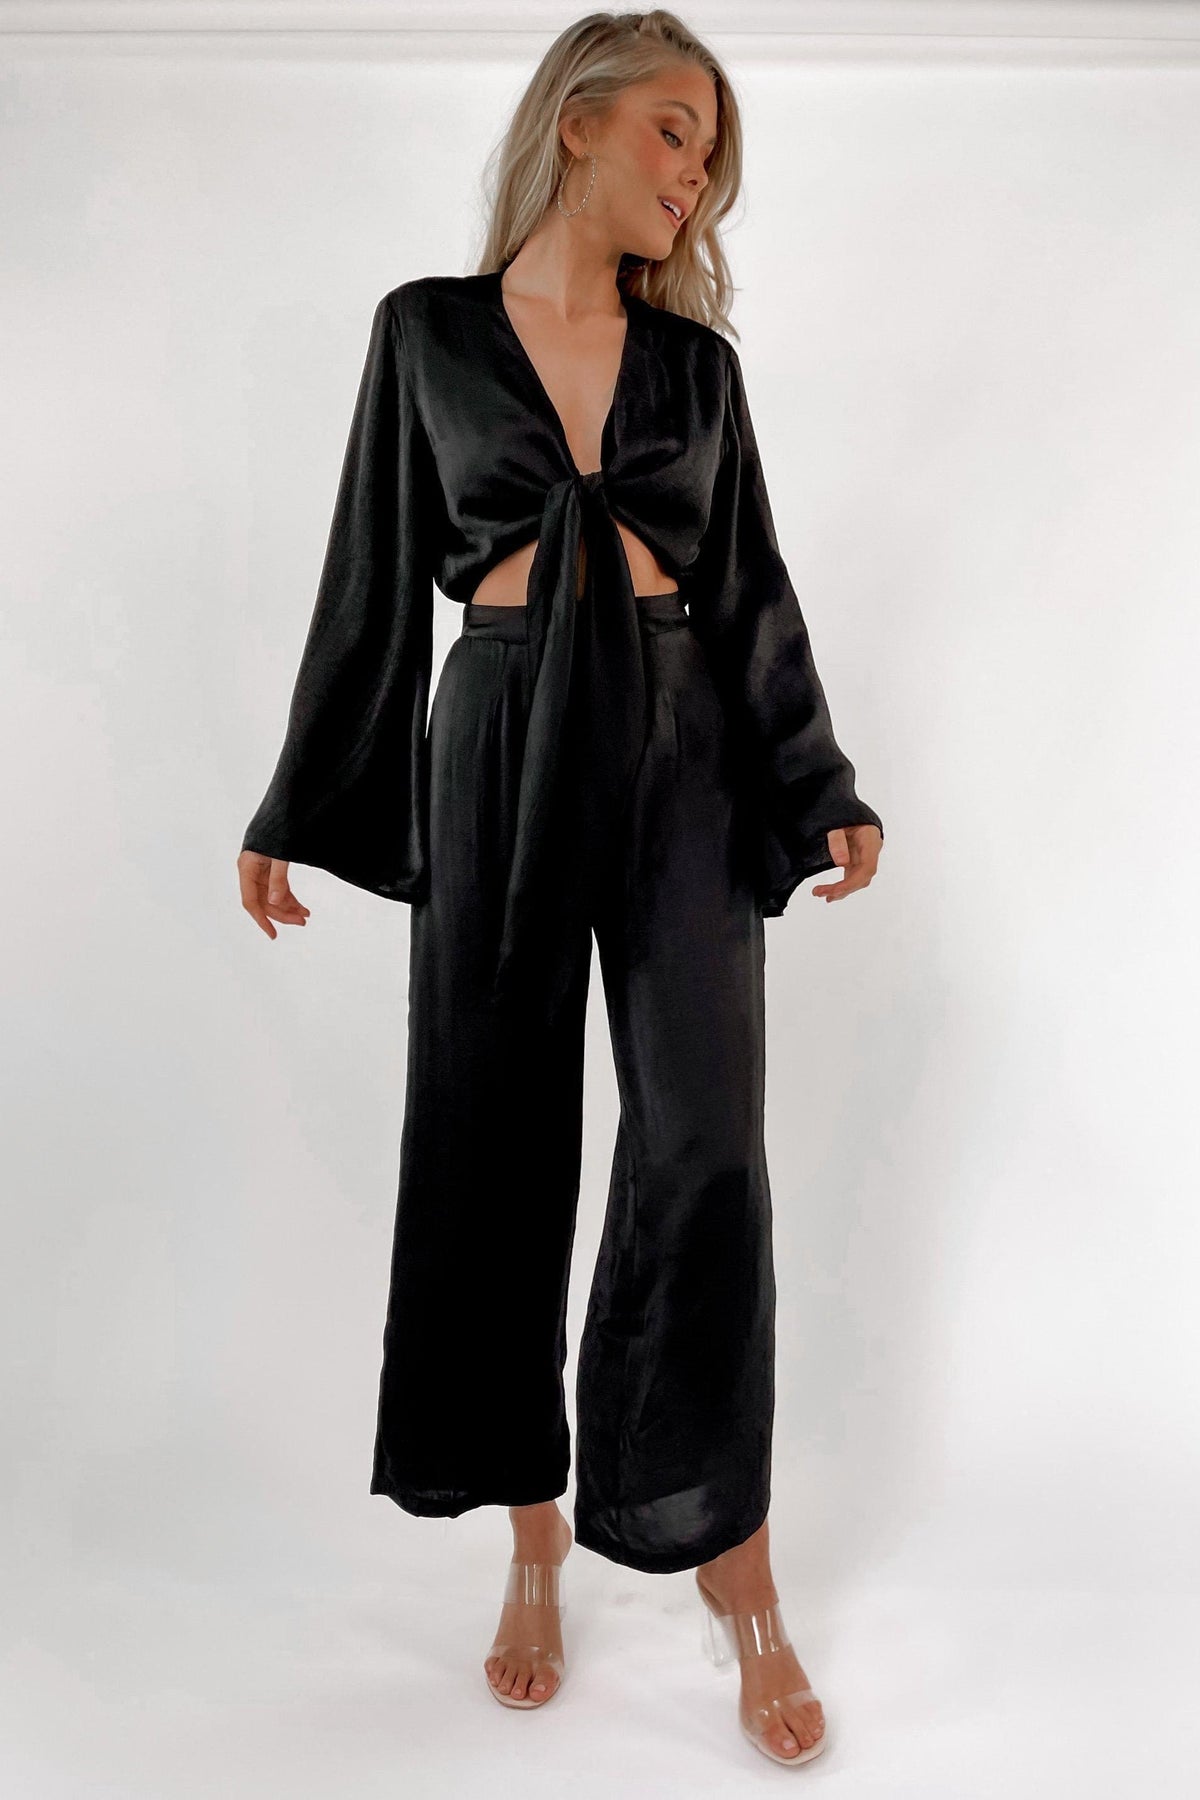 One Last Time Jumpsuit, BLACK, JUMPSUITS, LONG SLEEVE, POLYESTER, RAYON, Sale, Shop The Latest One Last Time Jumpsuit Only 130.00 from MISHKAH, -MISHKAH